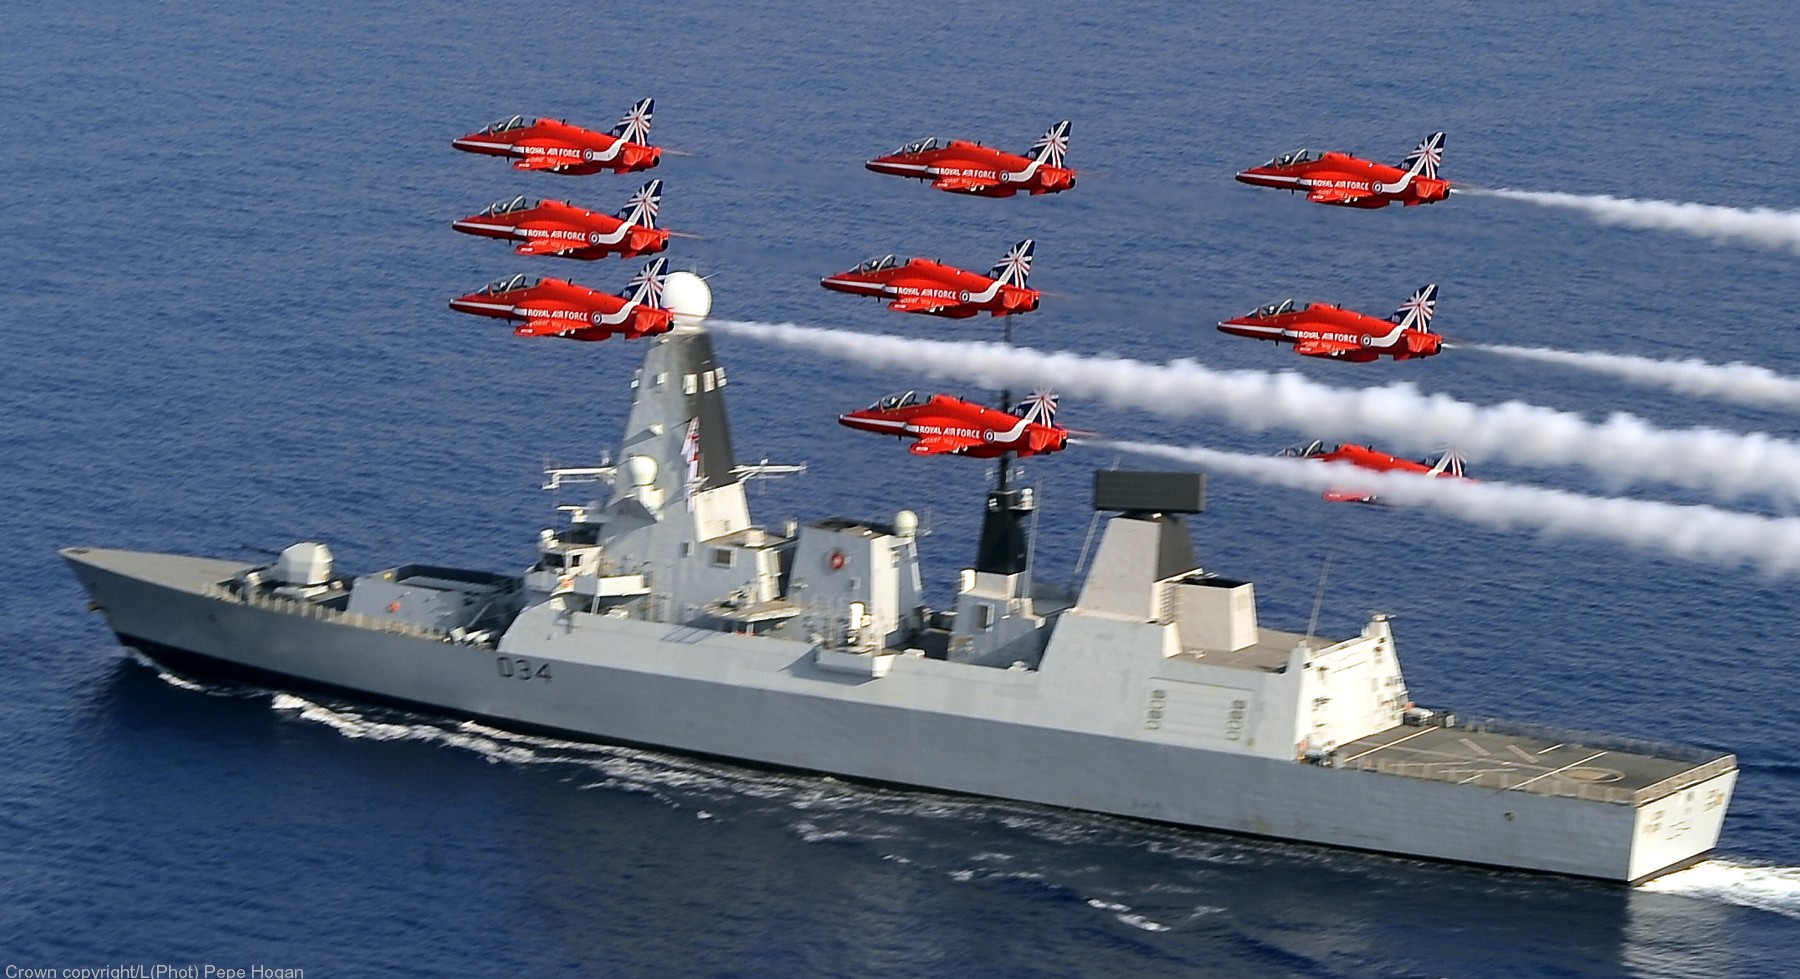 hms diamond d-34 type 45 daring class guided missile destroyer ddg royal navy sea viper paams 34 red arrows